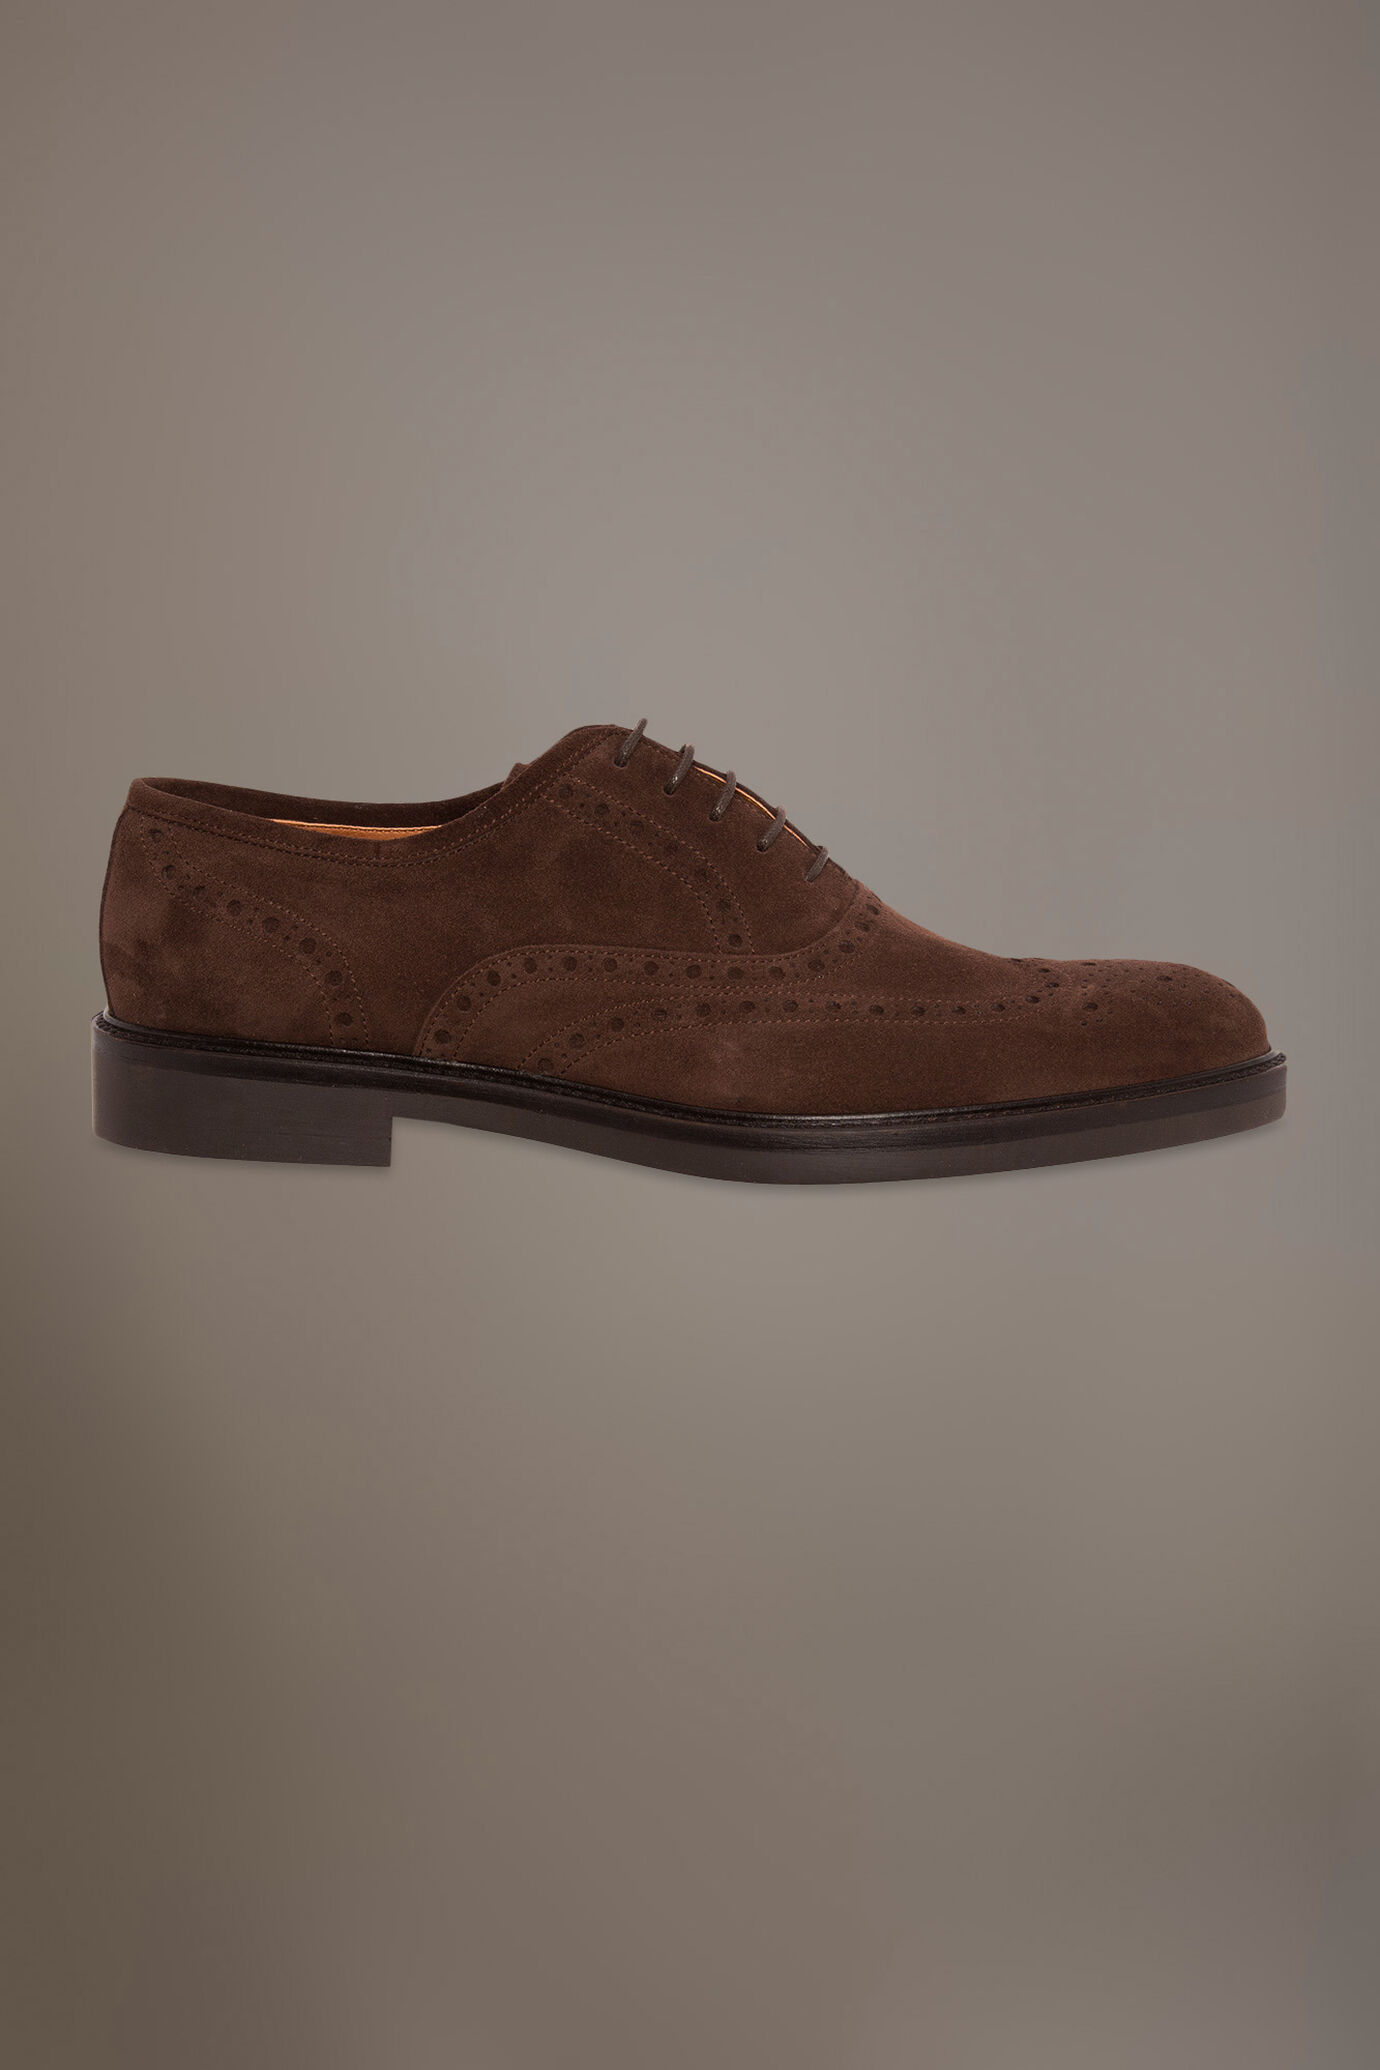 Oxford brouge shoes - 100% leather - suede image number 1